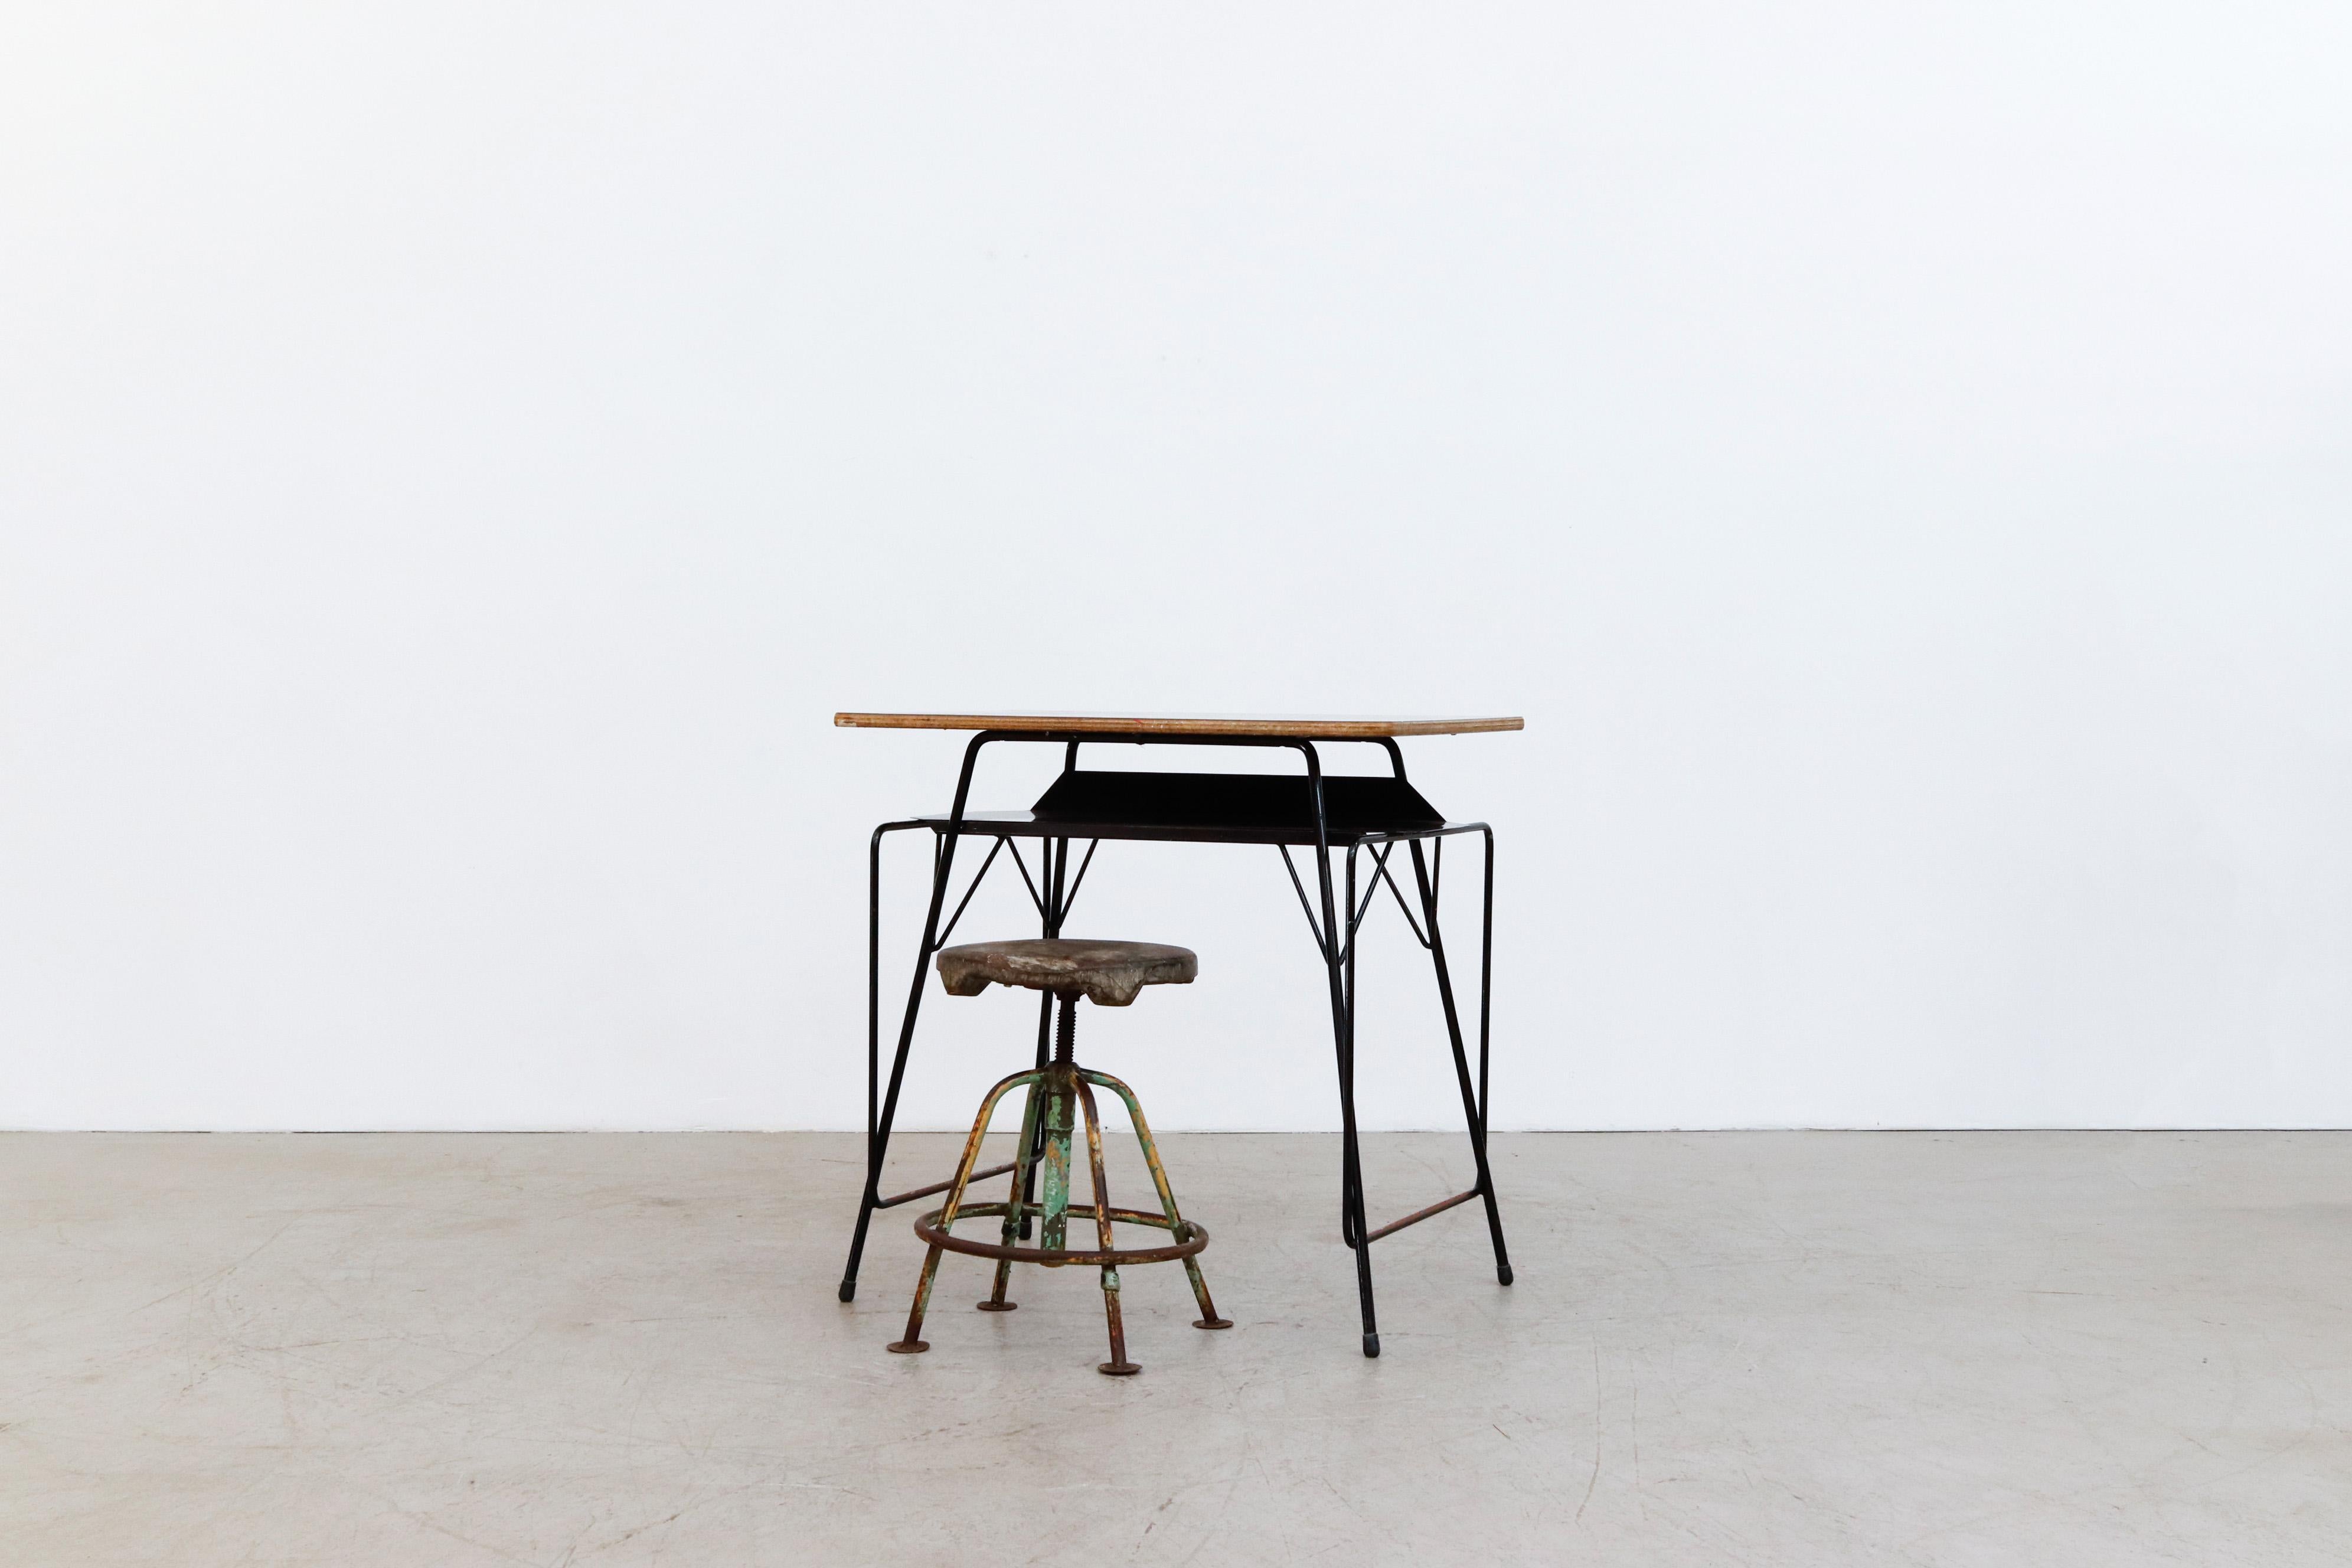 Mini Willy Van Der Meeren Industrial desks for Tubax. Printed formica top with solid black enameled metal frame in original condition with visible wear and scratching consistent with age and use. Priced individually. Shown with well worn vintage